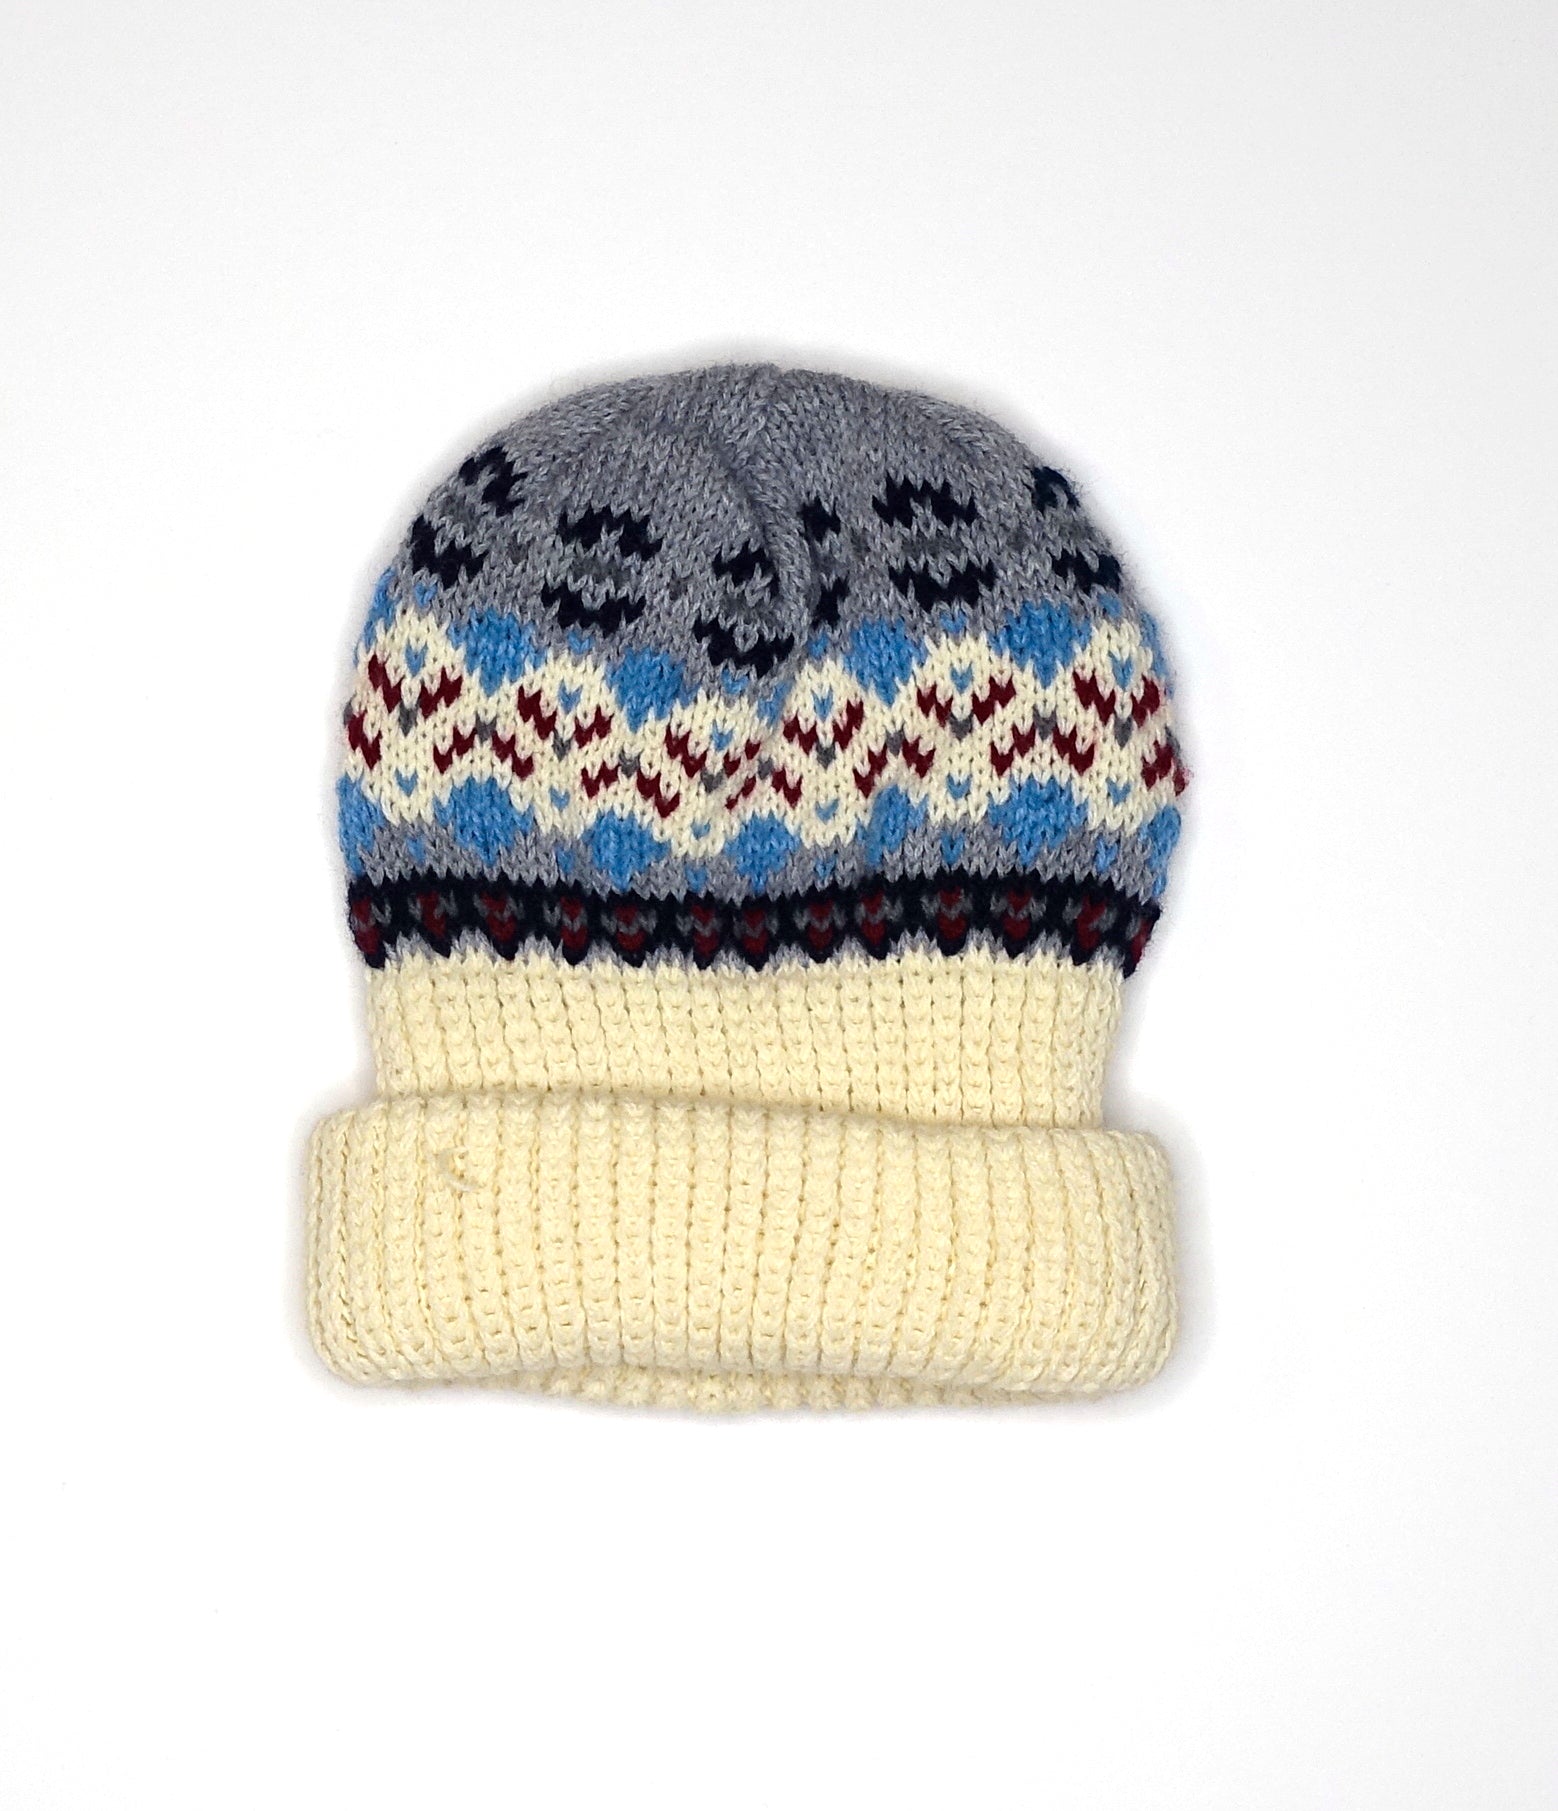 Chemical People - White & Grey Knit Beanie